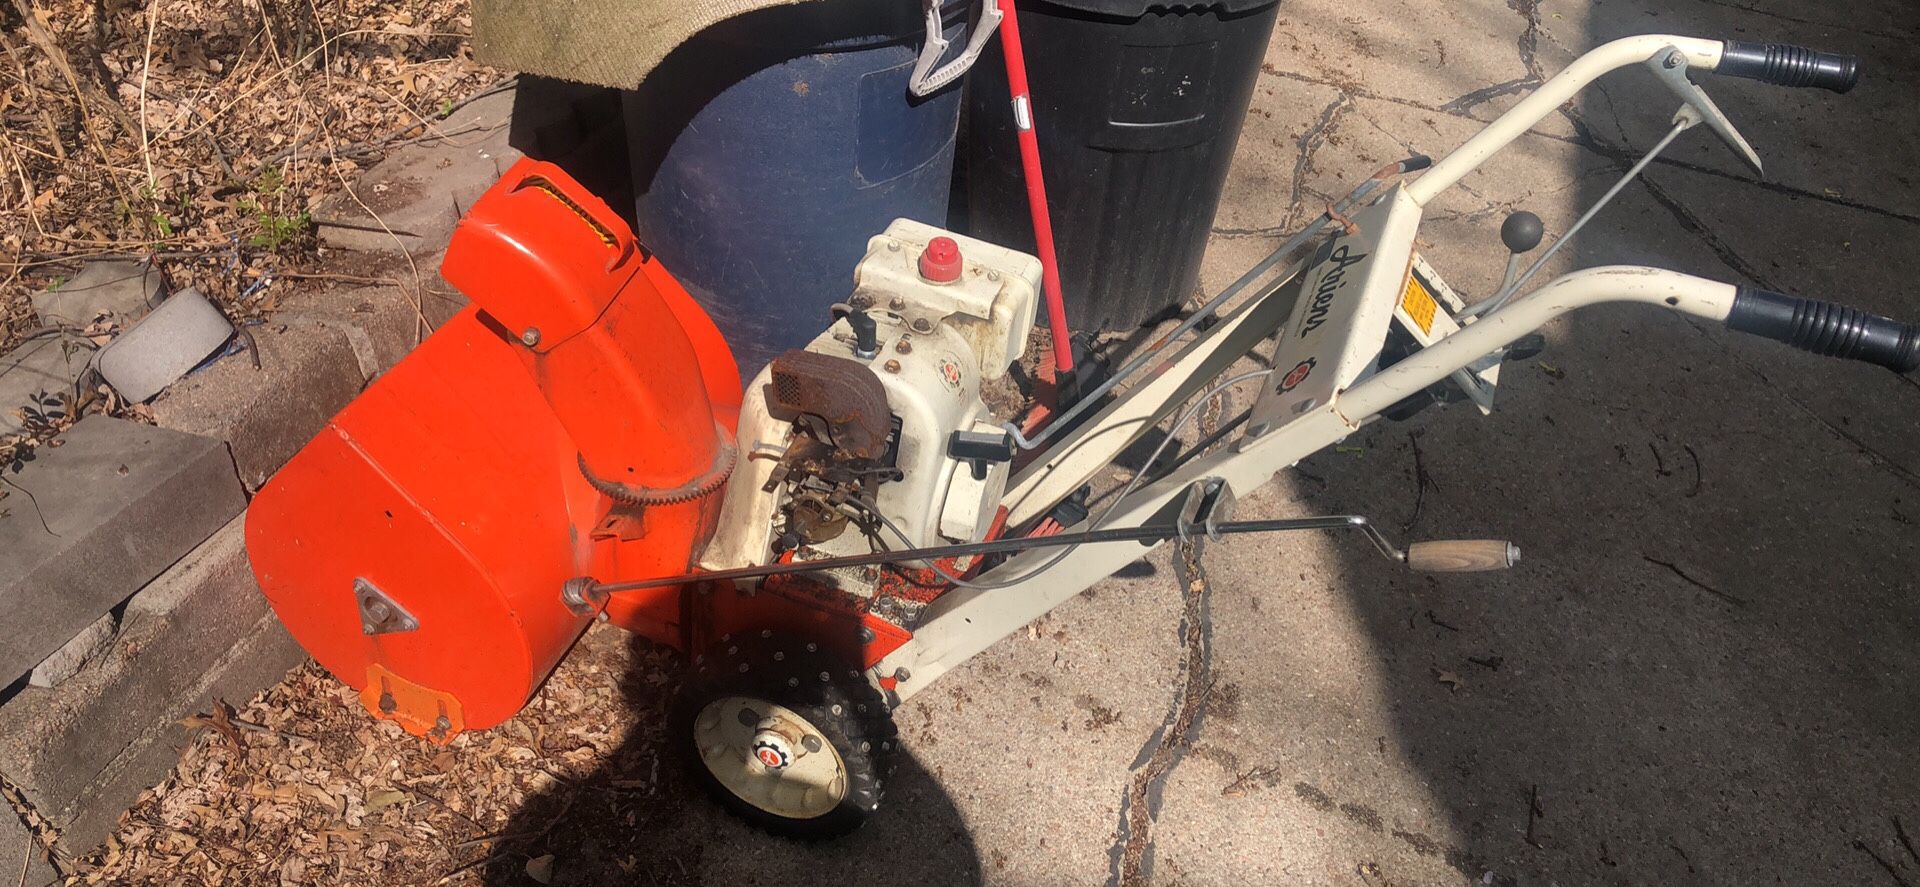 Snow Blower - Does not work